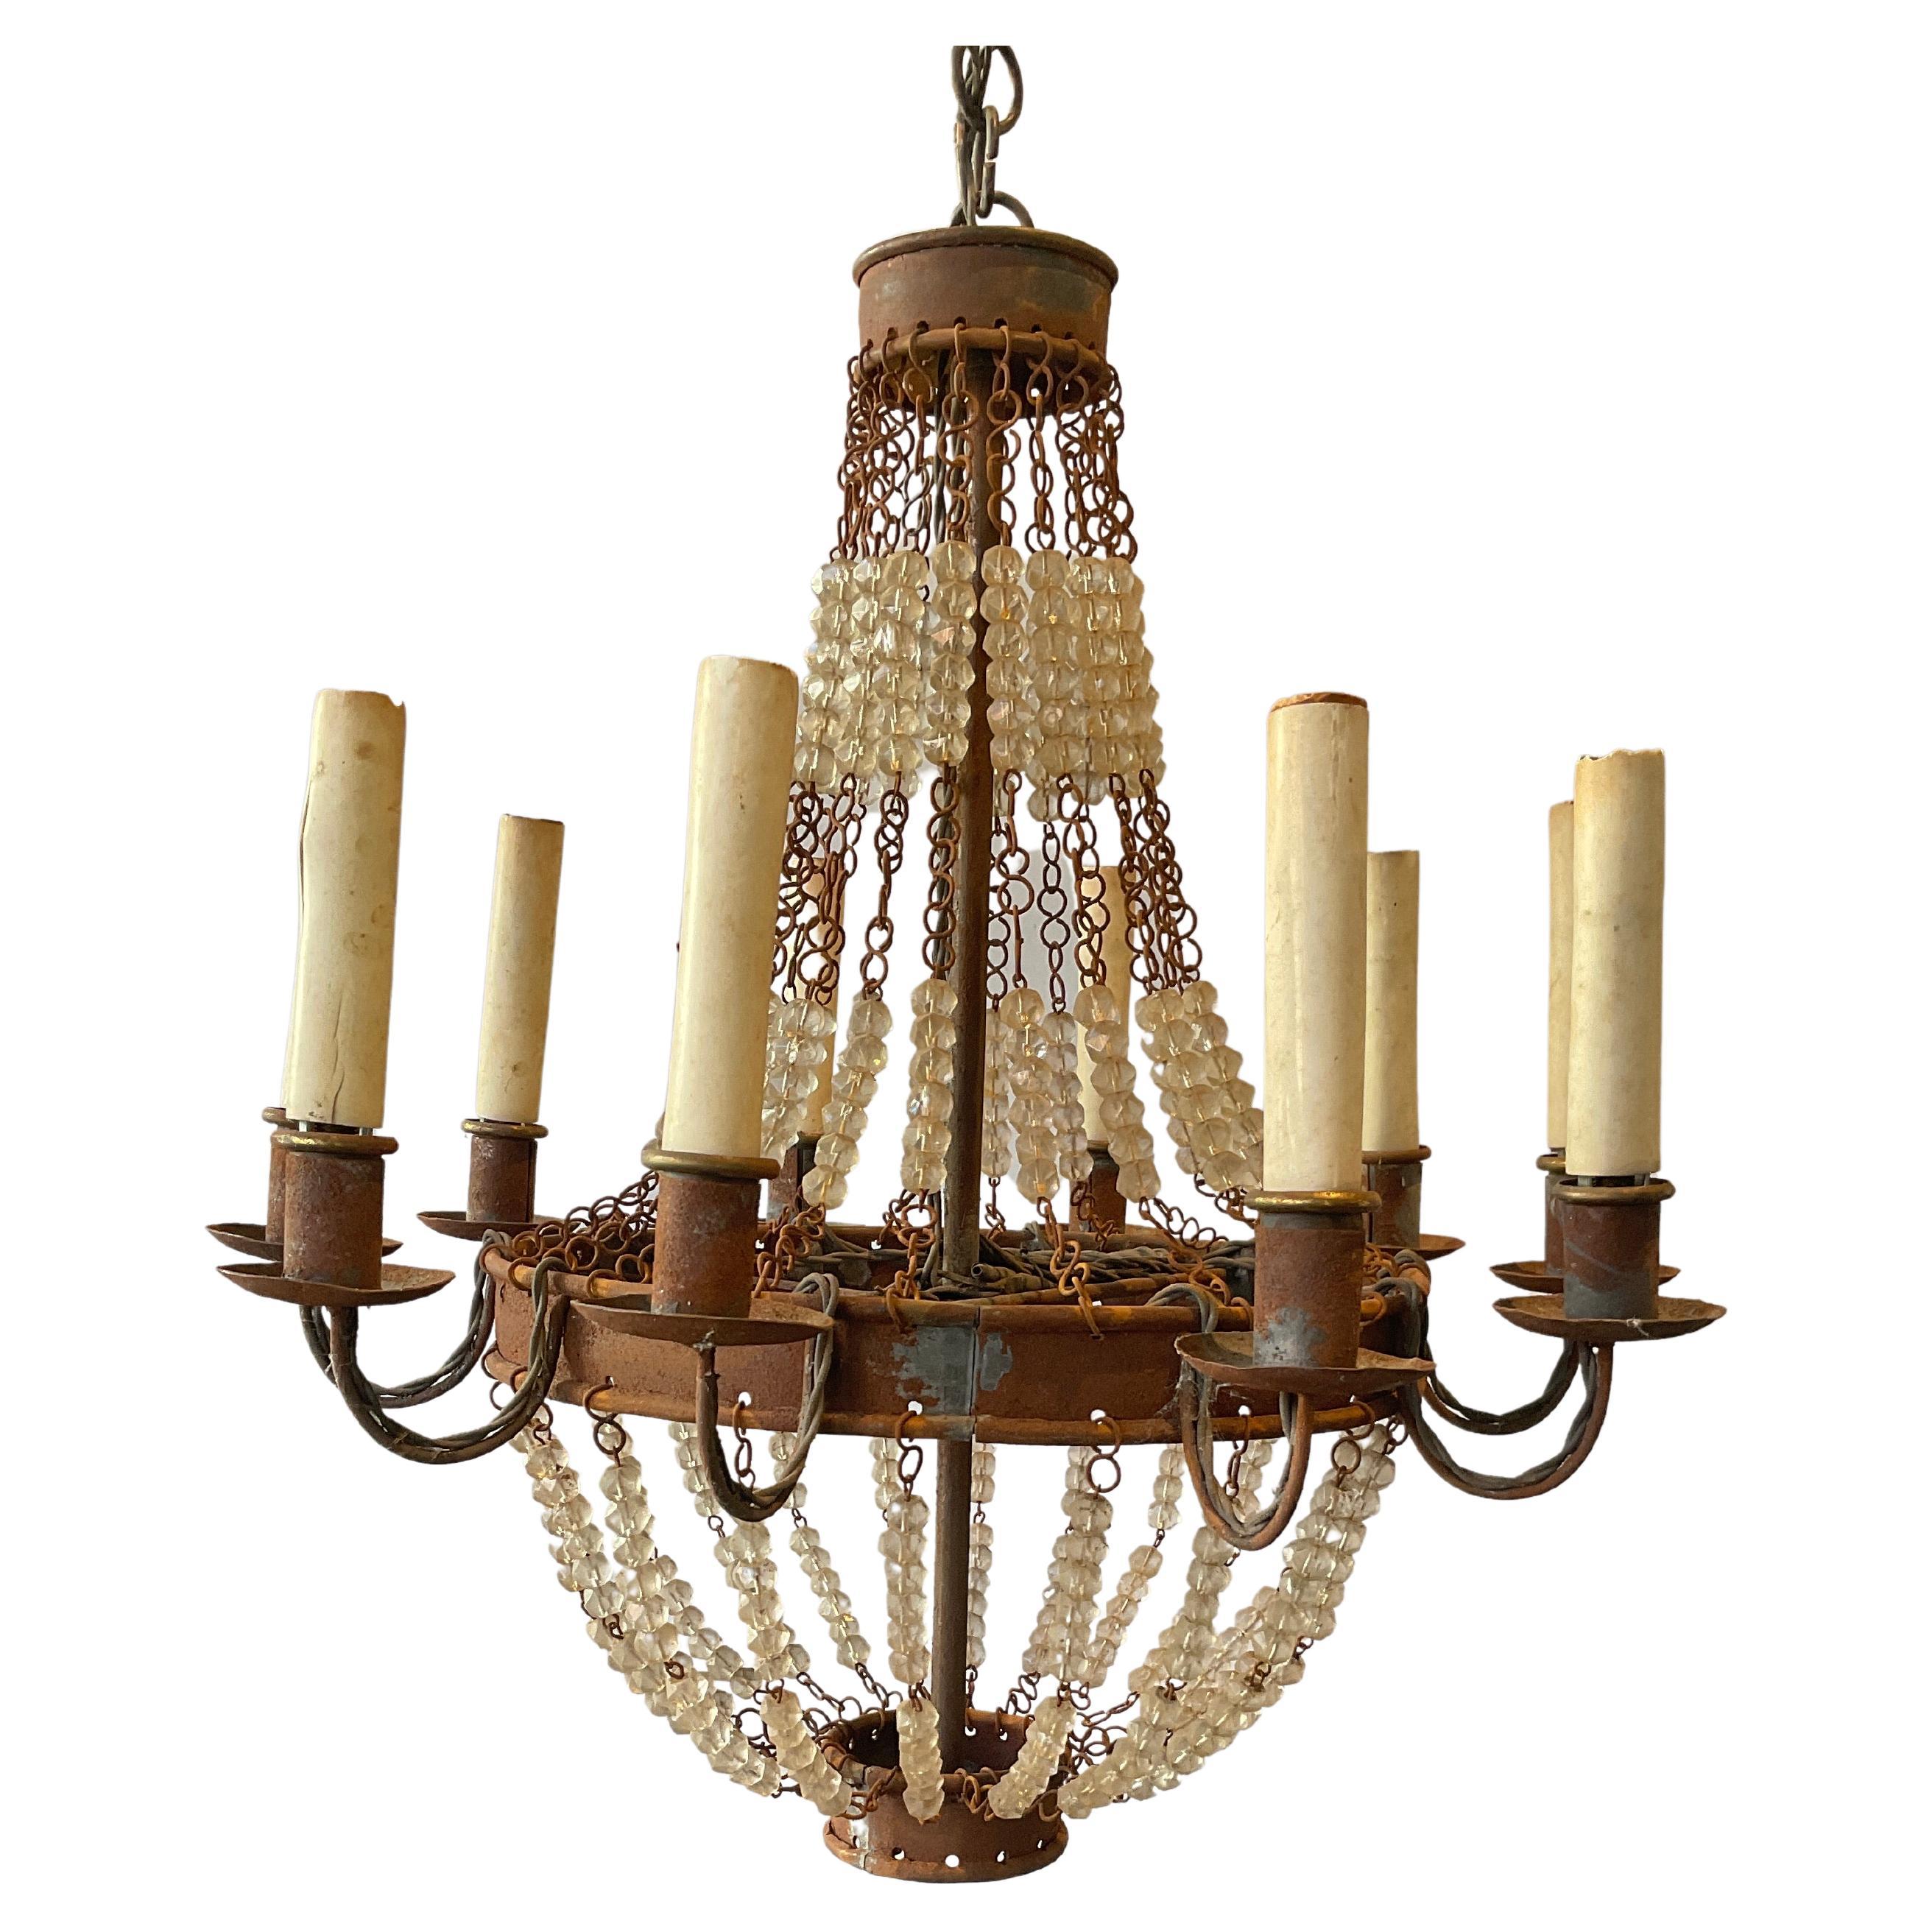 1970s French Style Beaded Rusted Metal Chandelier